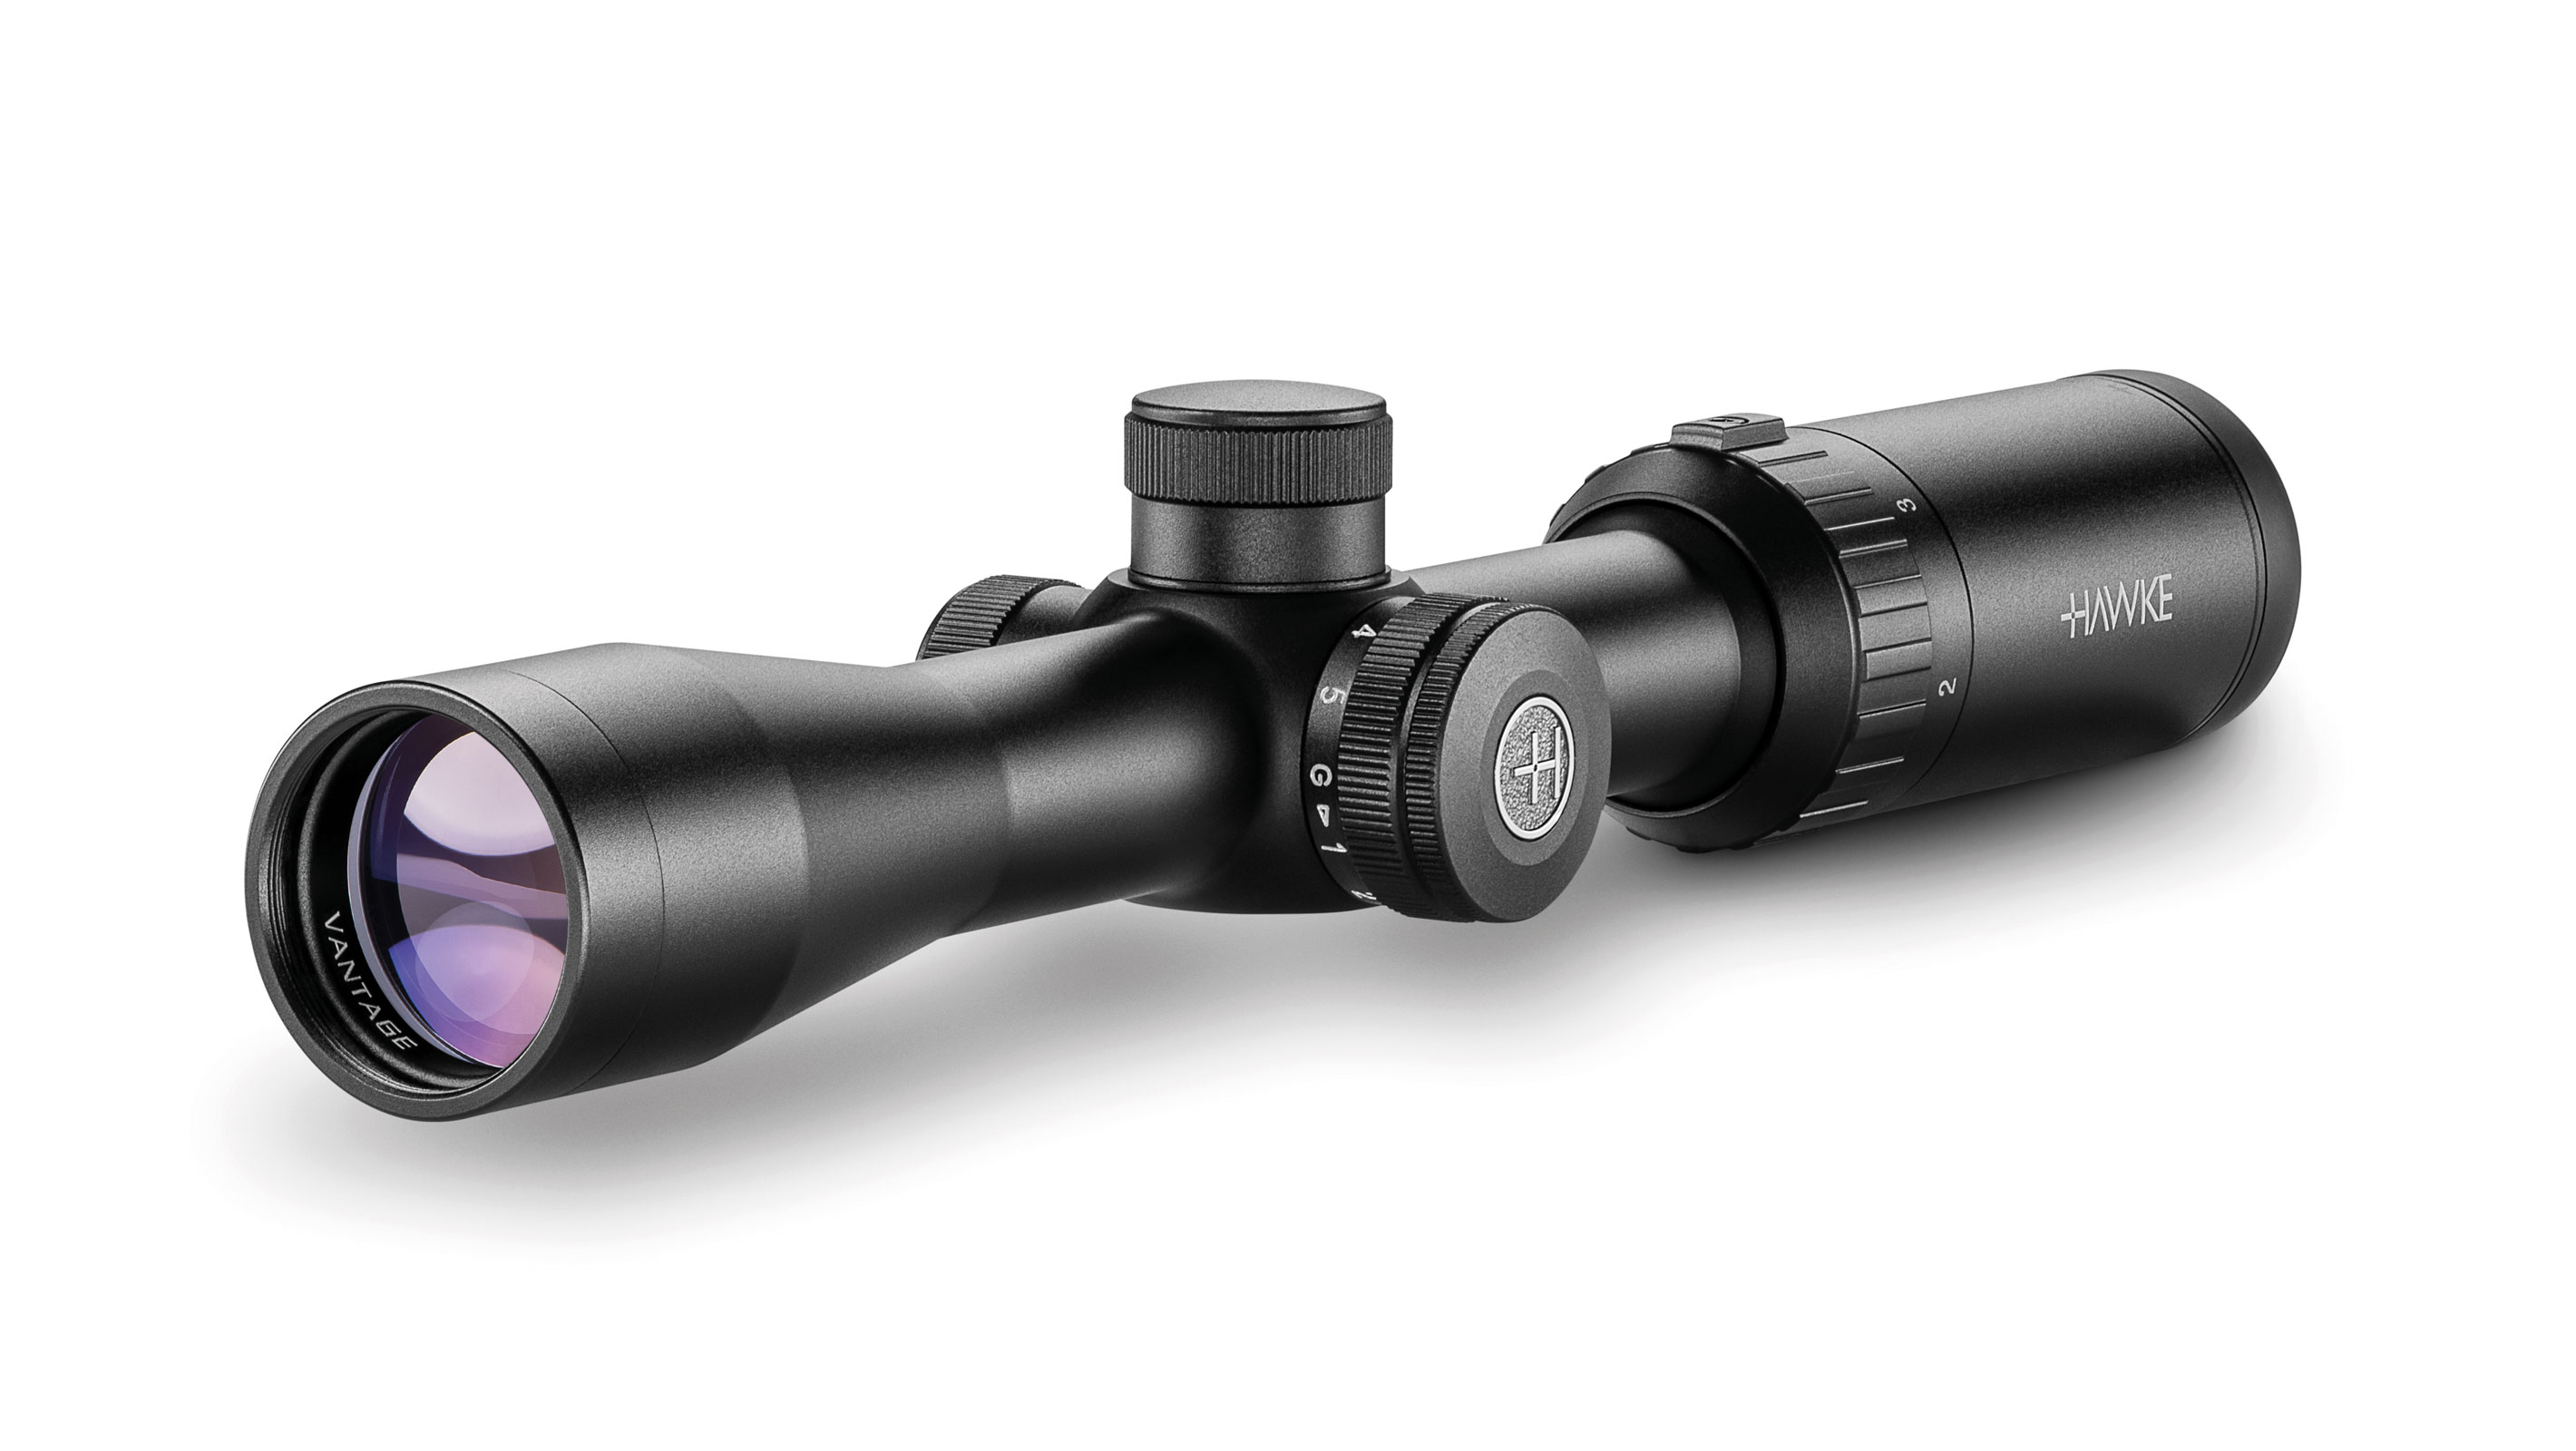 Objective End View Of The Hawke Vantage IR 2-7x32 Mil Dot IR Rifle Scope